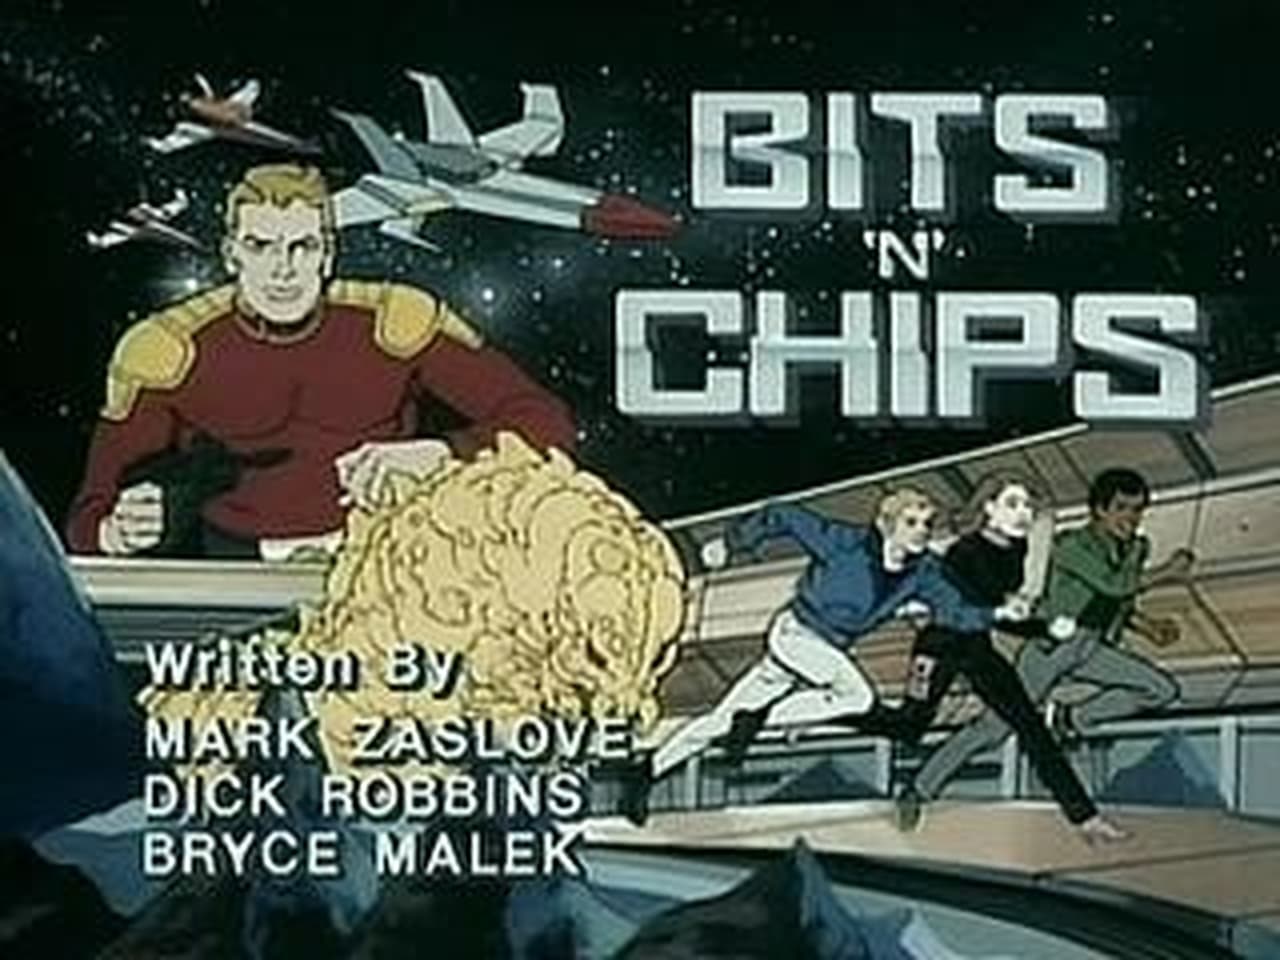 Bits and Chips